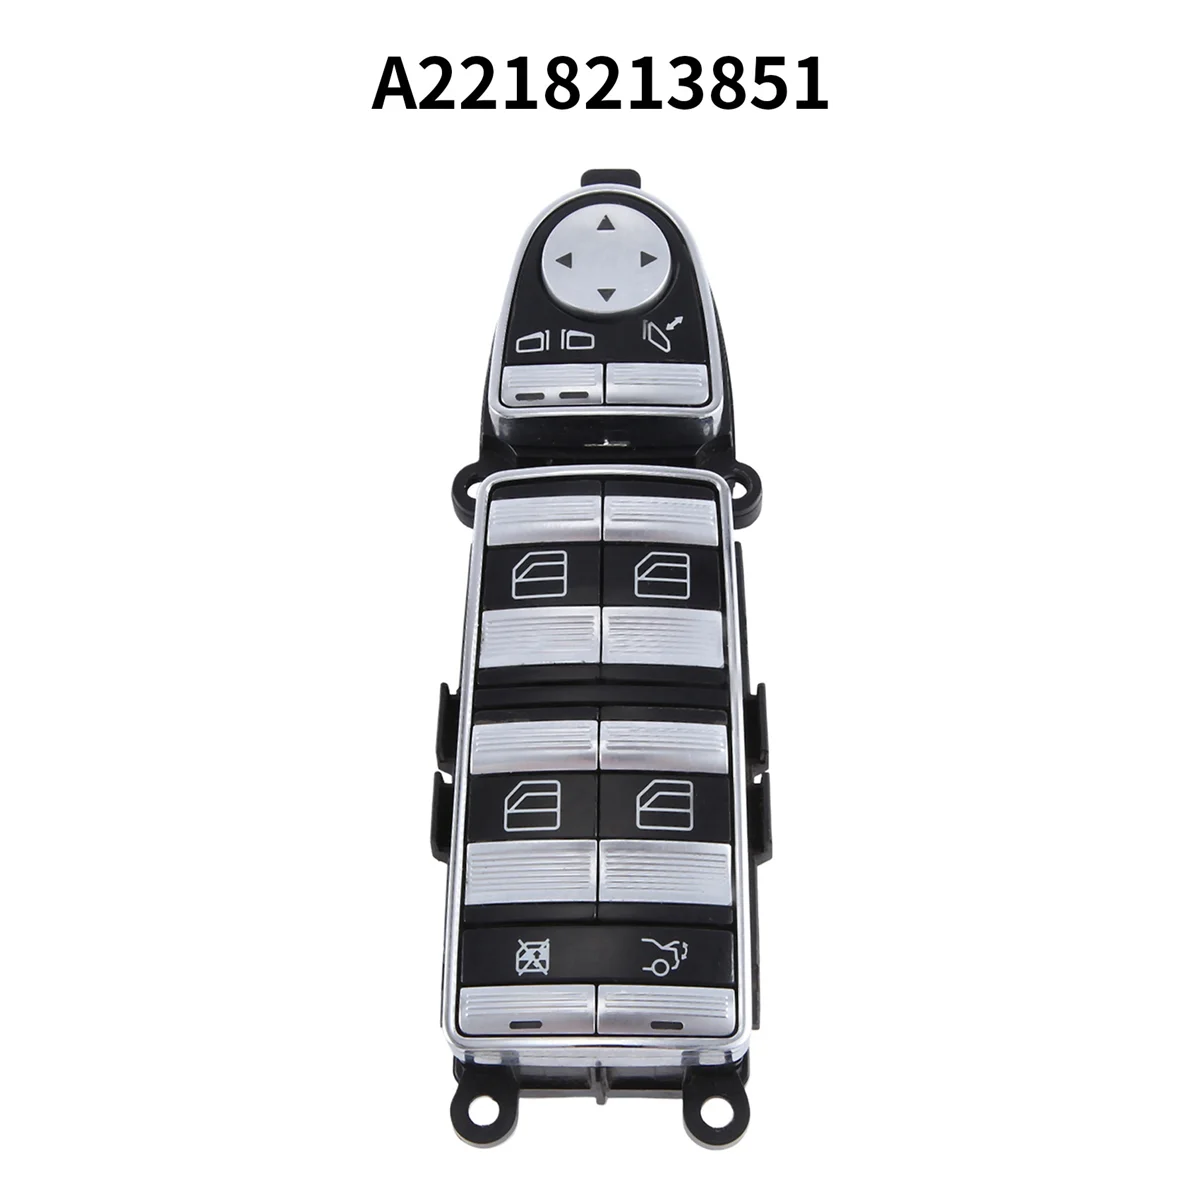 

A2218213851 Car Left Driver P-Fold Window Switch Black for MERCEDES Benz S450 S550 S600 S63 (W221) 2007-2009